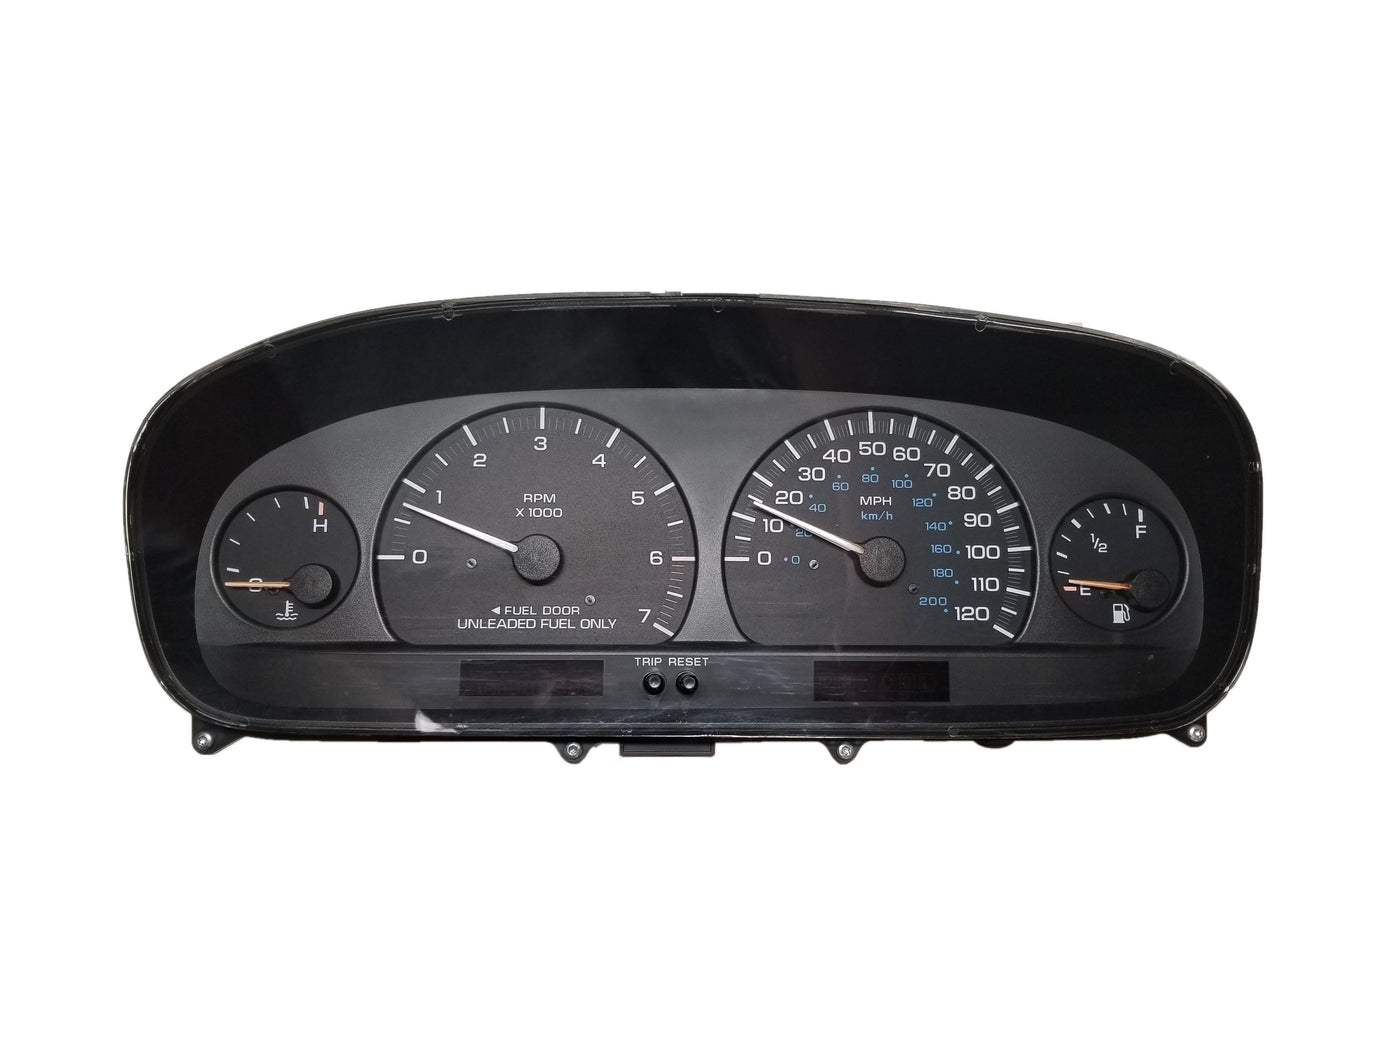 1996-2000 Chrysler Town and Country Caravan Voyager Gauge Cluster Mail-in Repair Service Automotive Circuit Solutions 